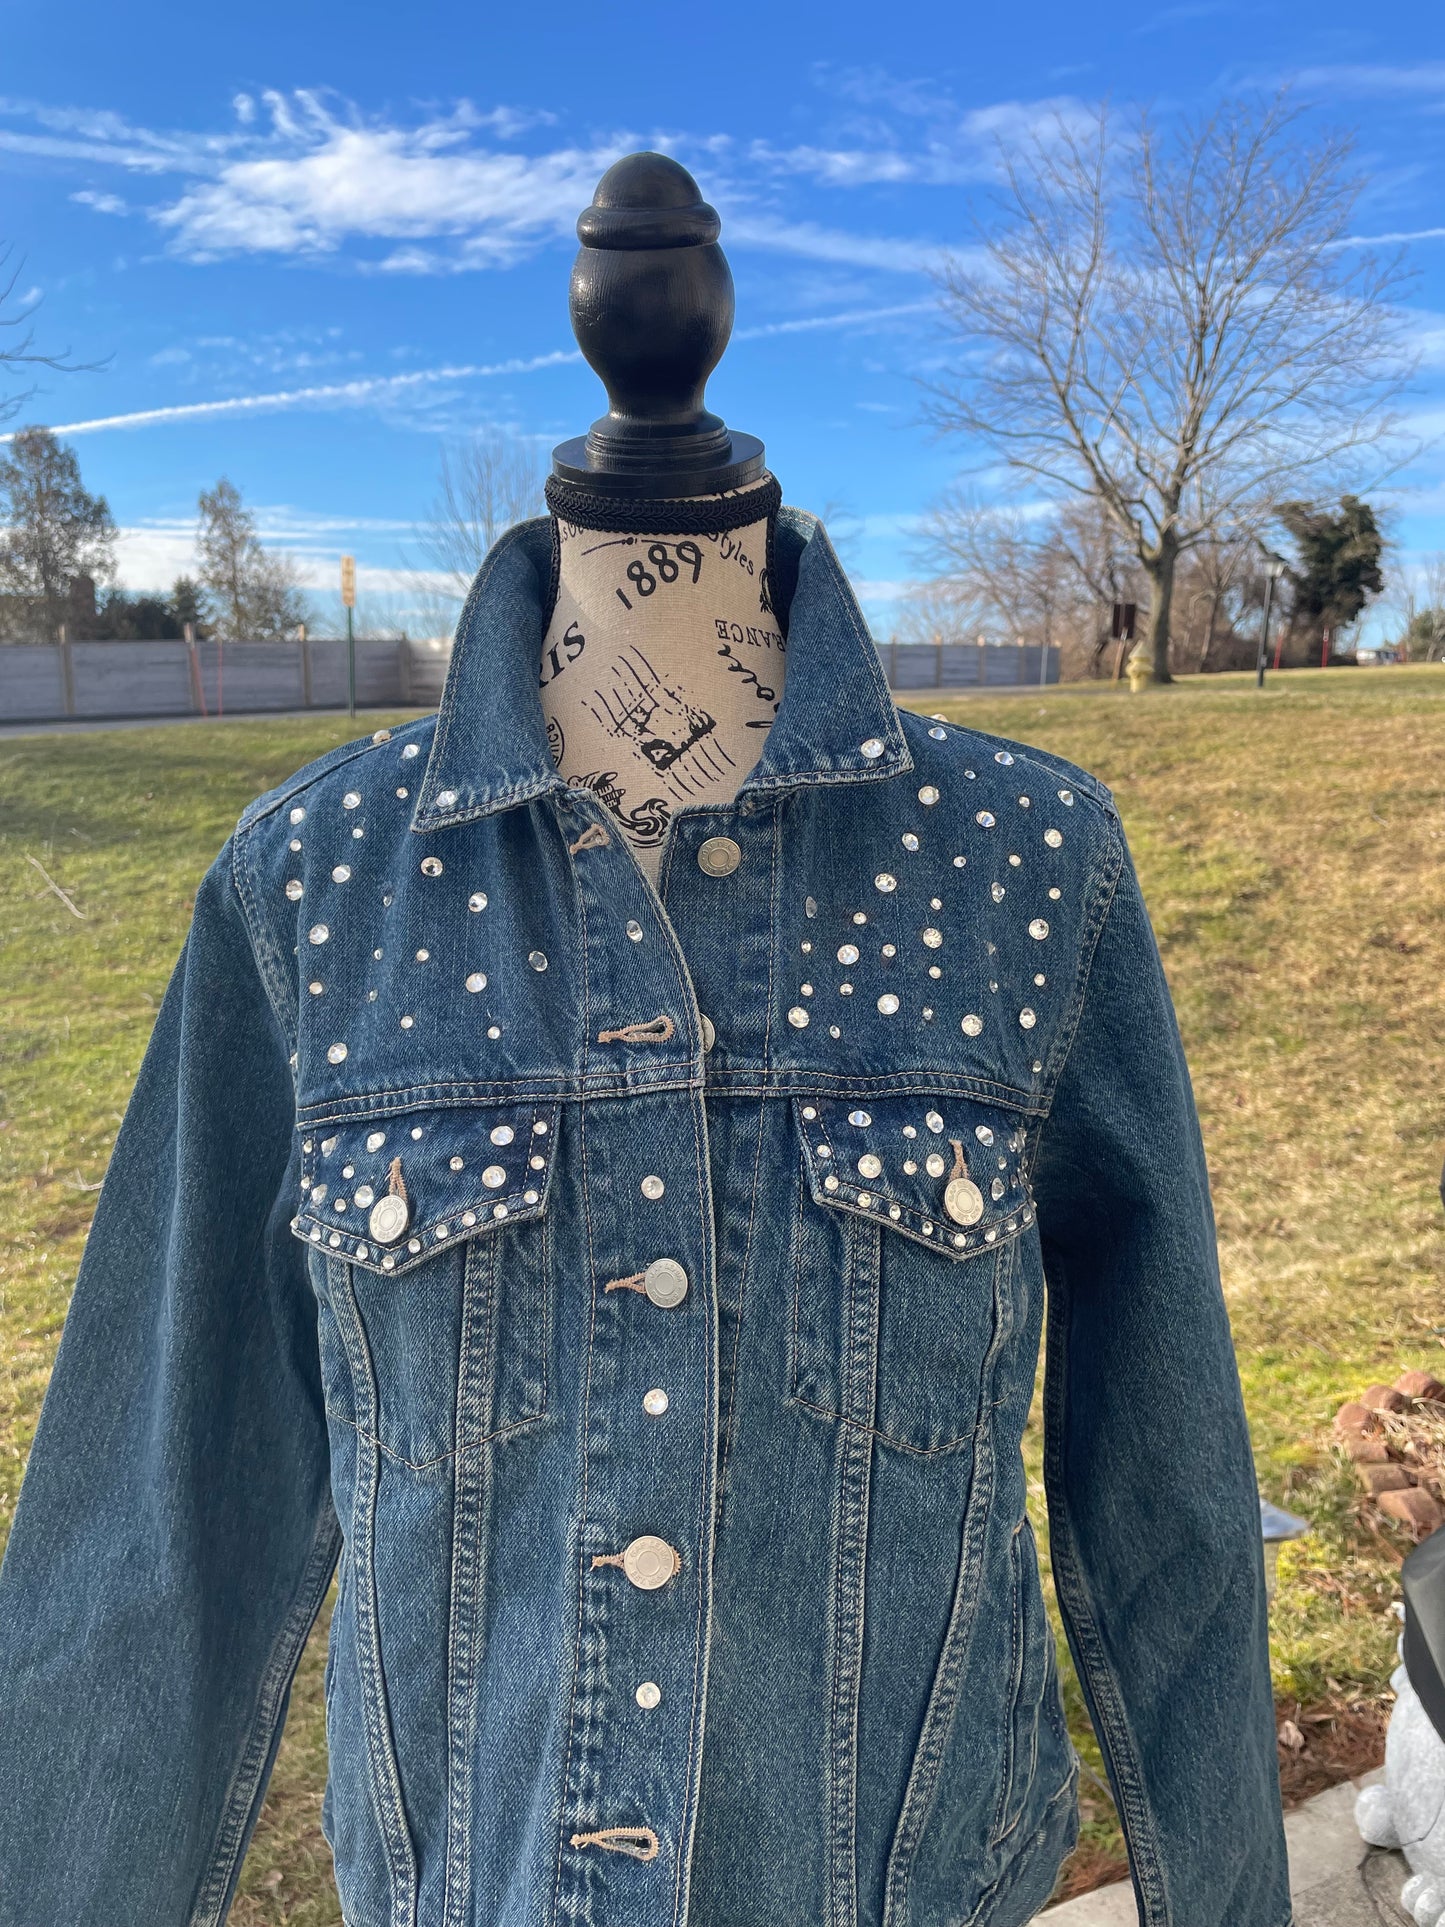 Denim Jacket Pearl and Rhinestone with lettering Bride or Wifey